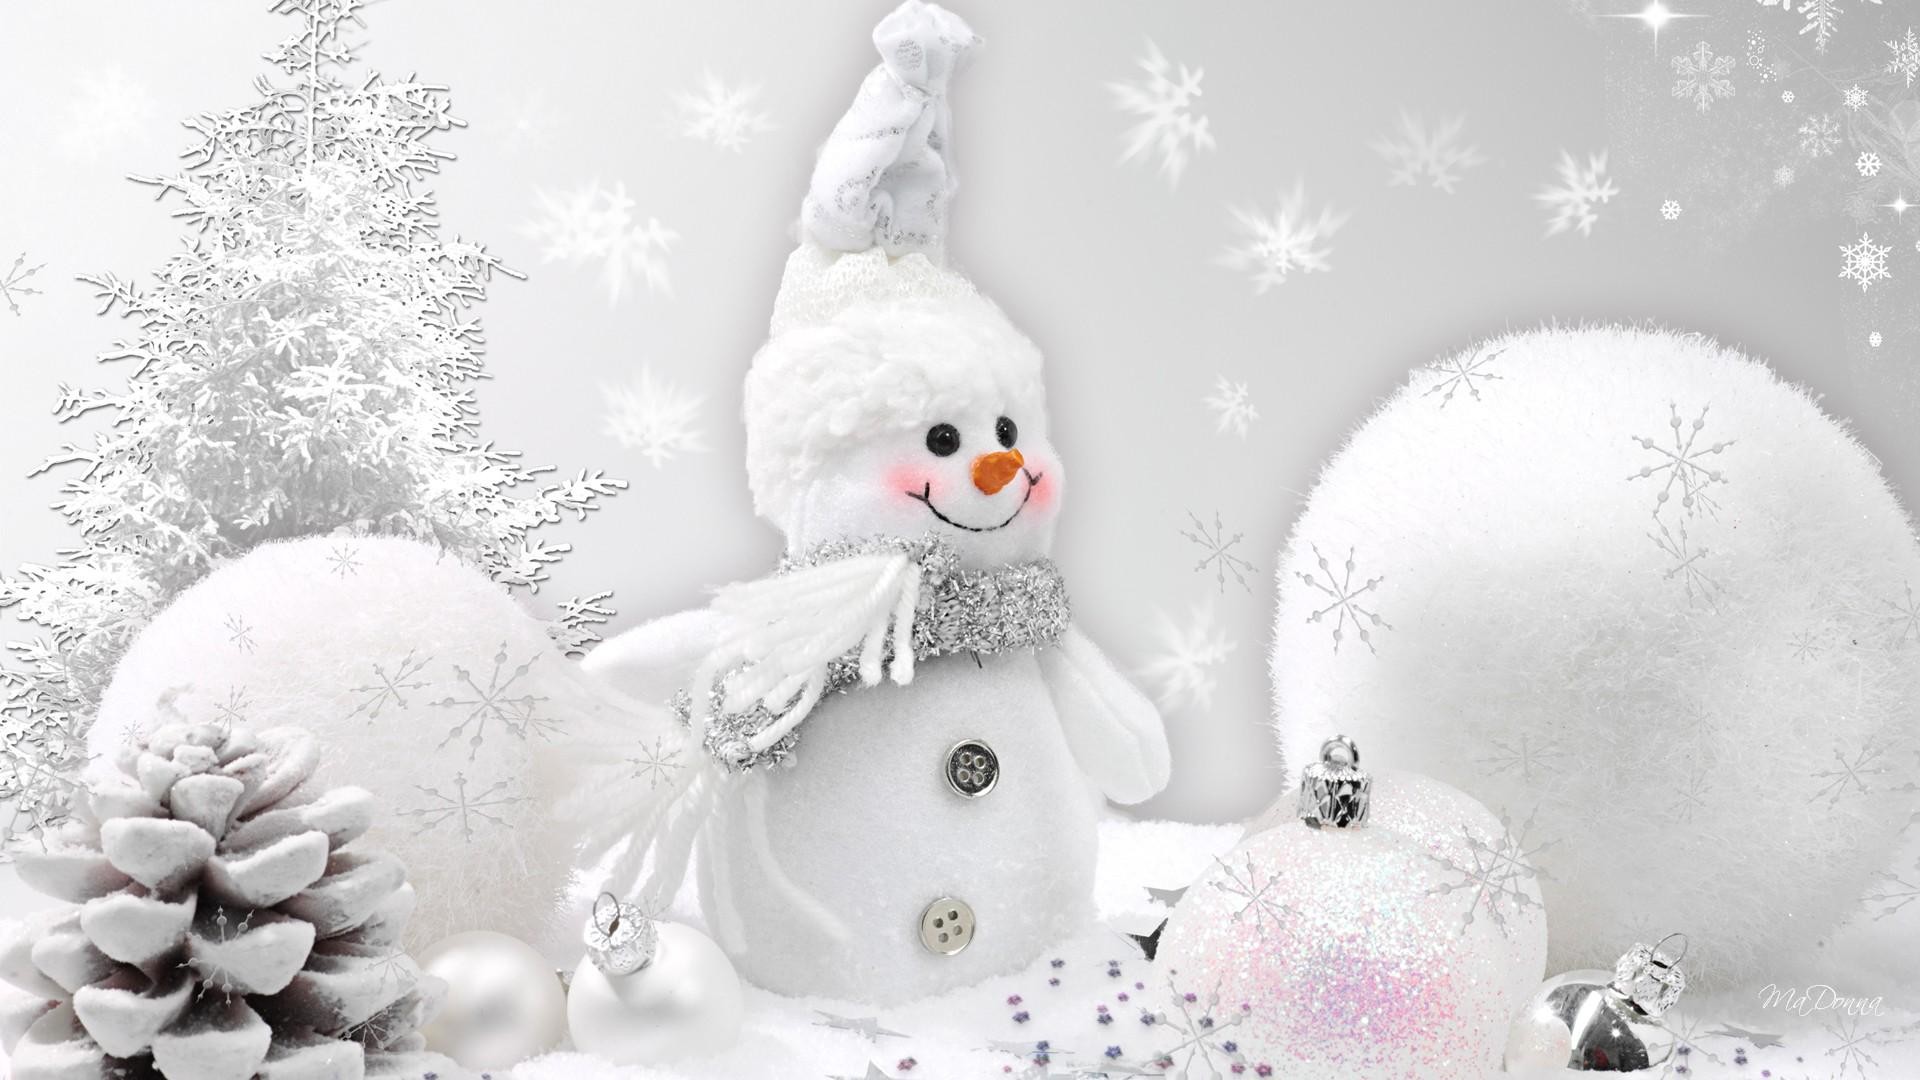 1920x1080 Country Snowman Wallpaper | Free Wallpapers Image